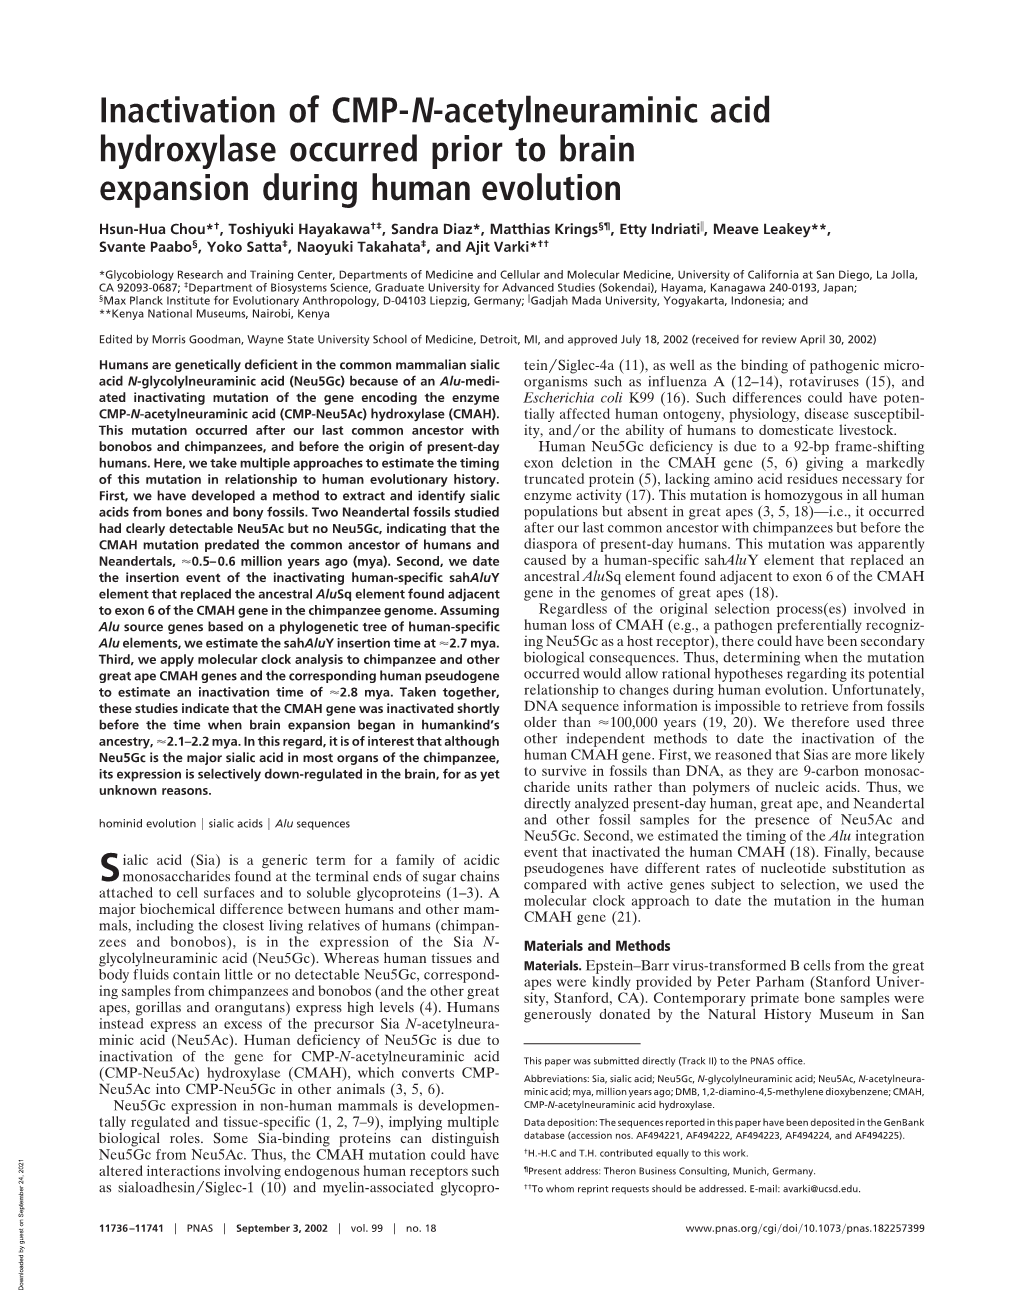 Inactivation of CMP-N-Acetylneuraminic Acid Hydroxylase Occurred Prior to Brain Expansion During Human Evolution